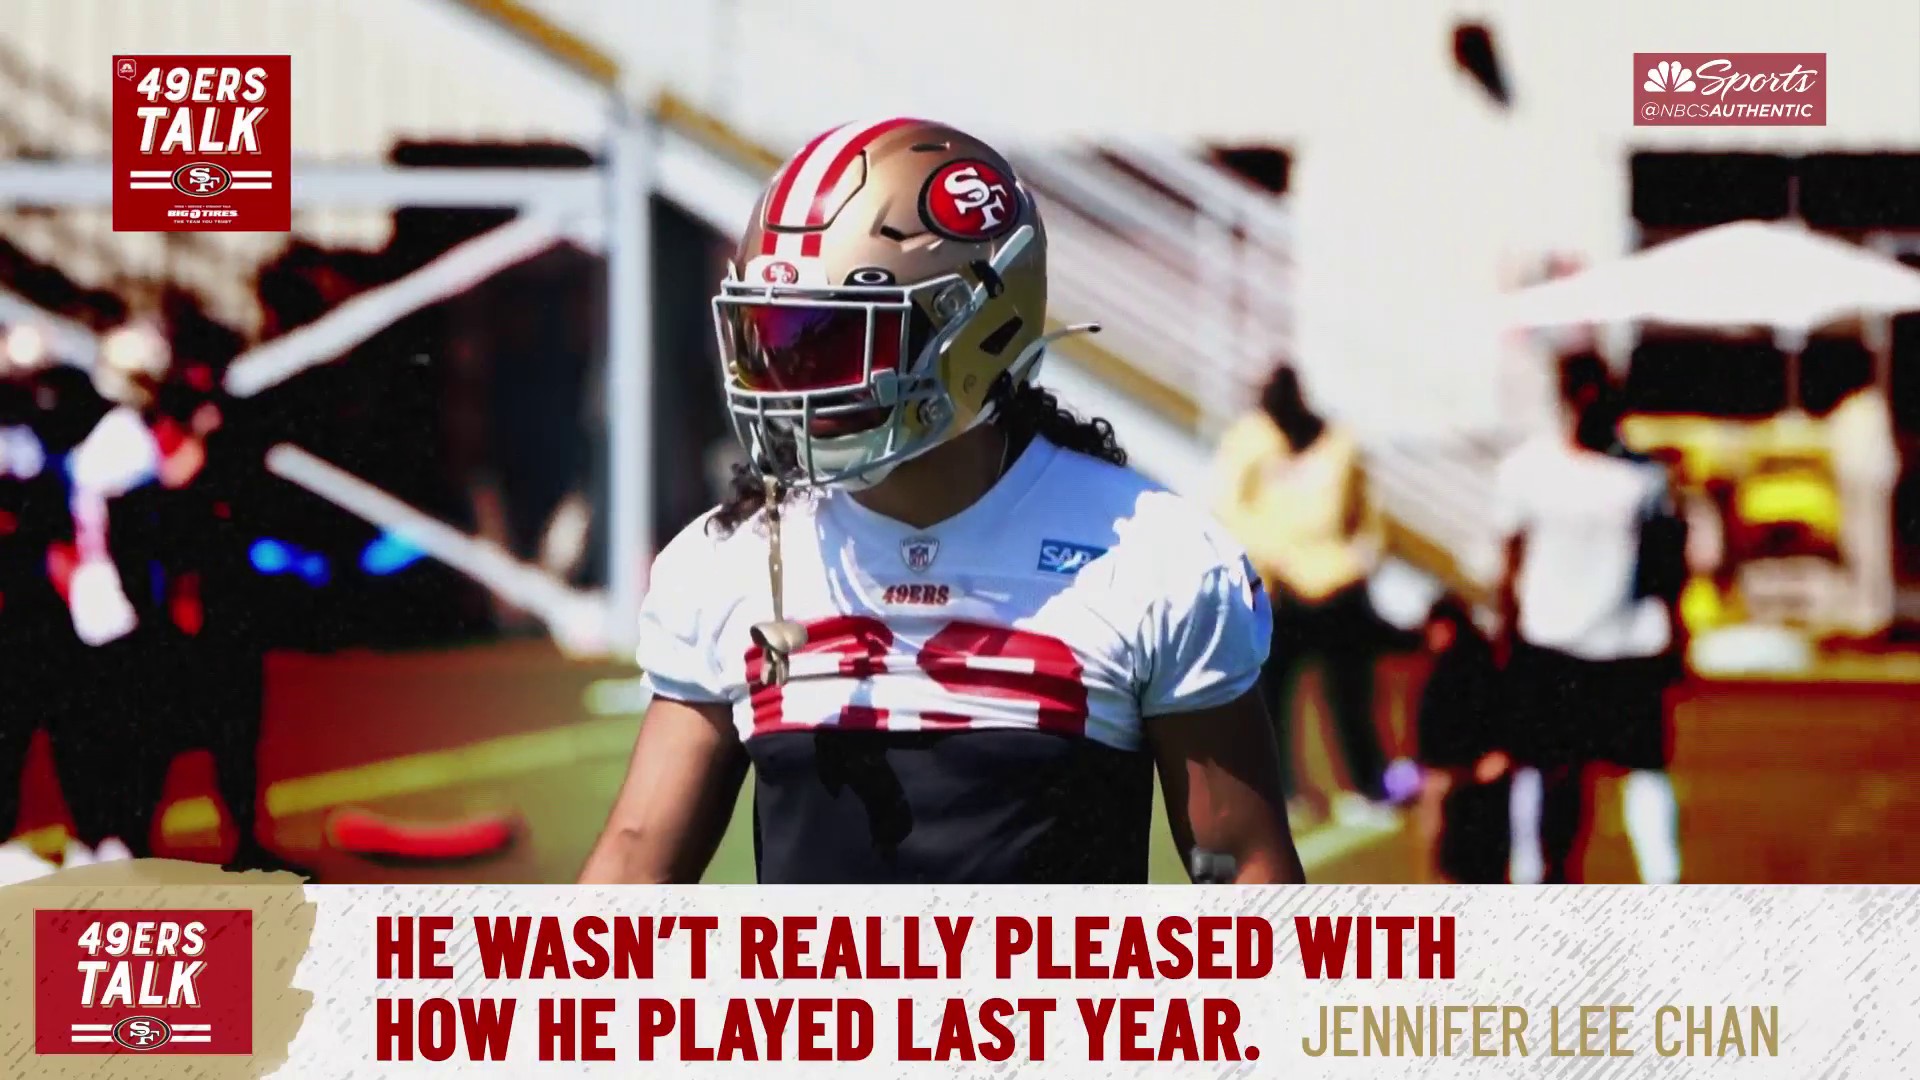 Talanoa Hufanga needs to be more consistent for 49ers this season